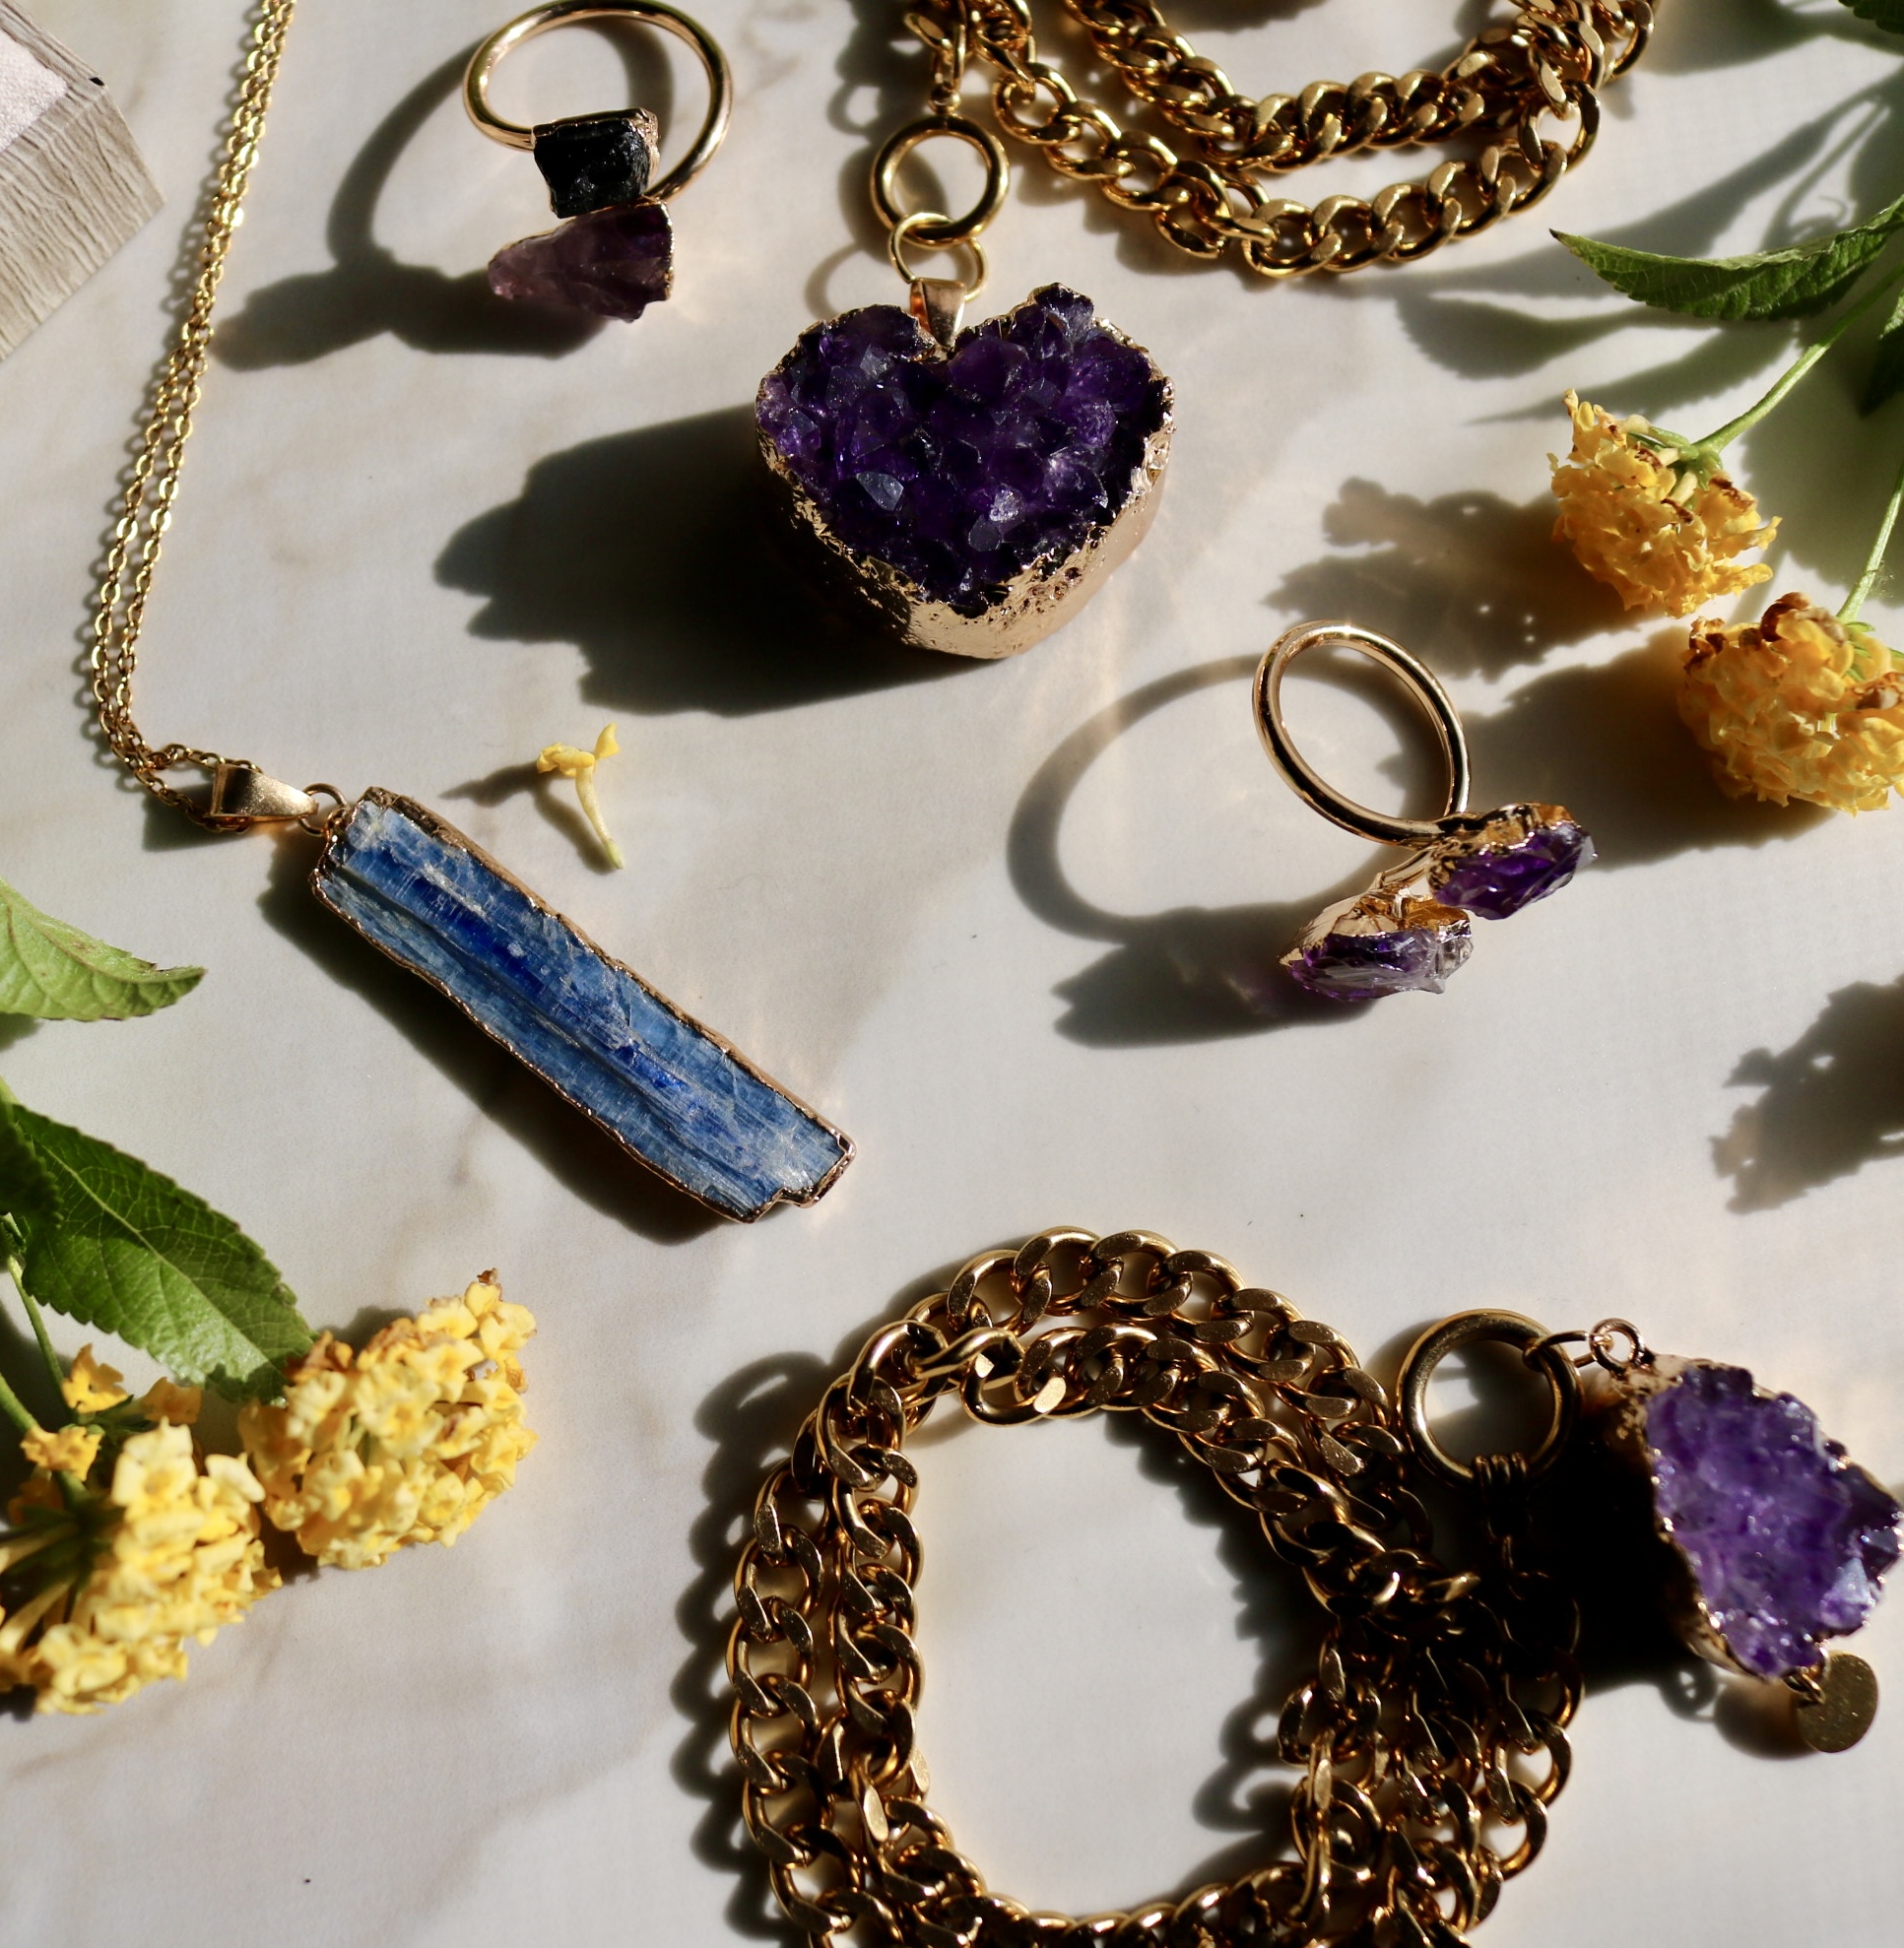 How to clean tarnished jewelry with non-toxic ingredients